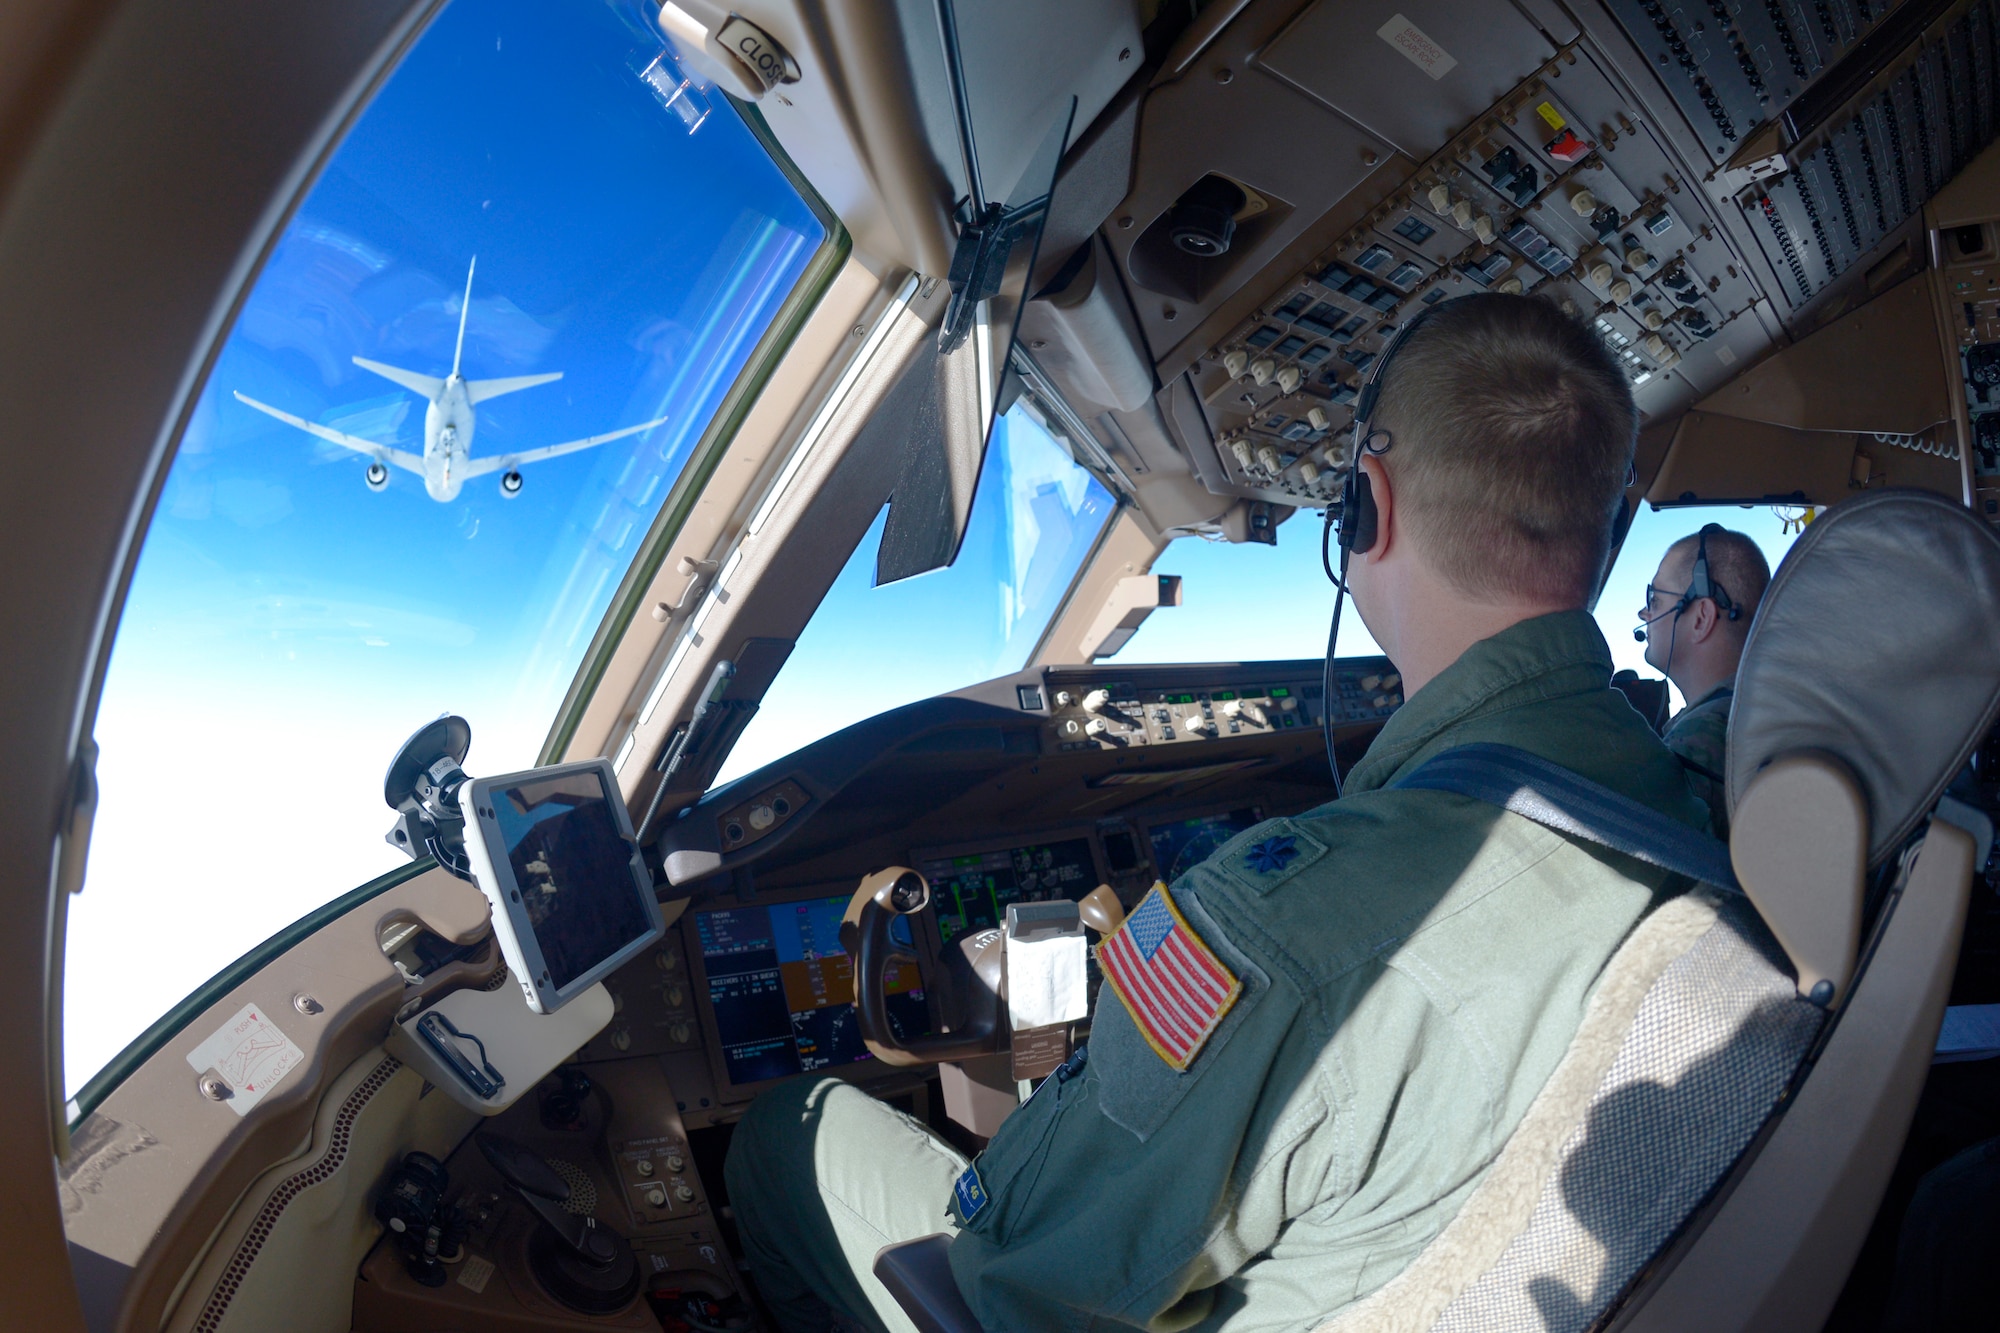 Lt. Col. Greg Van Splunder and Lt. Col. Brandon Stock, pilots with the 157th Air Refueling Wing, Pease Air National Guard Base, New Hampshire Air National Guard, guide their KC-46A Pegasus as it receives fuel from another Pease KC-46A during a 36-hour endurance mission, Nov. 16, 2022. 

The long-duration sortie took place from Nov. 16-18 and was crewed by active duty and Air National Guard Airmen from Pease, who flew the jet non-stop from New Hampshire, across North America and the Pacific Ocean, around Guam, and back home again. The proof-of-concept operation showcased the ability of the Air Force’s newest tanker to project the force in the modern battle space. (U.S. Air National Guard photo by Senior Master Sgt. Timm Huffman)